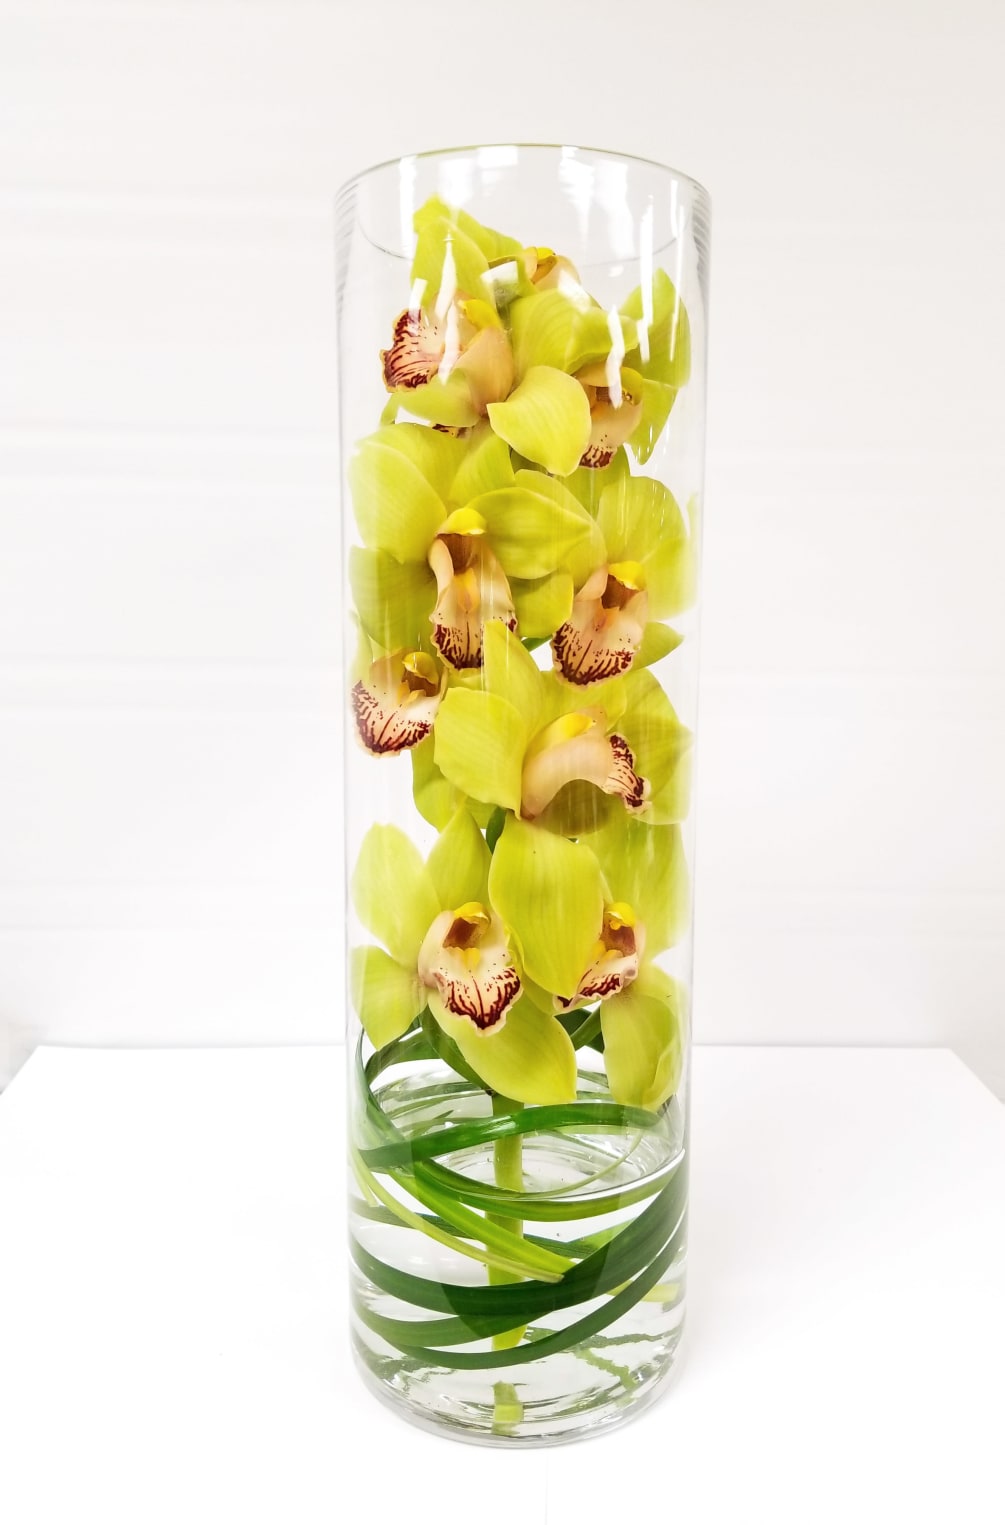 This sophisticated fresh floral arrangement features long-lasting cymbidium orchids with swirled lily